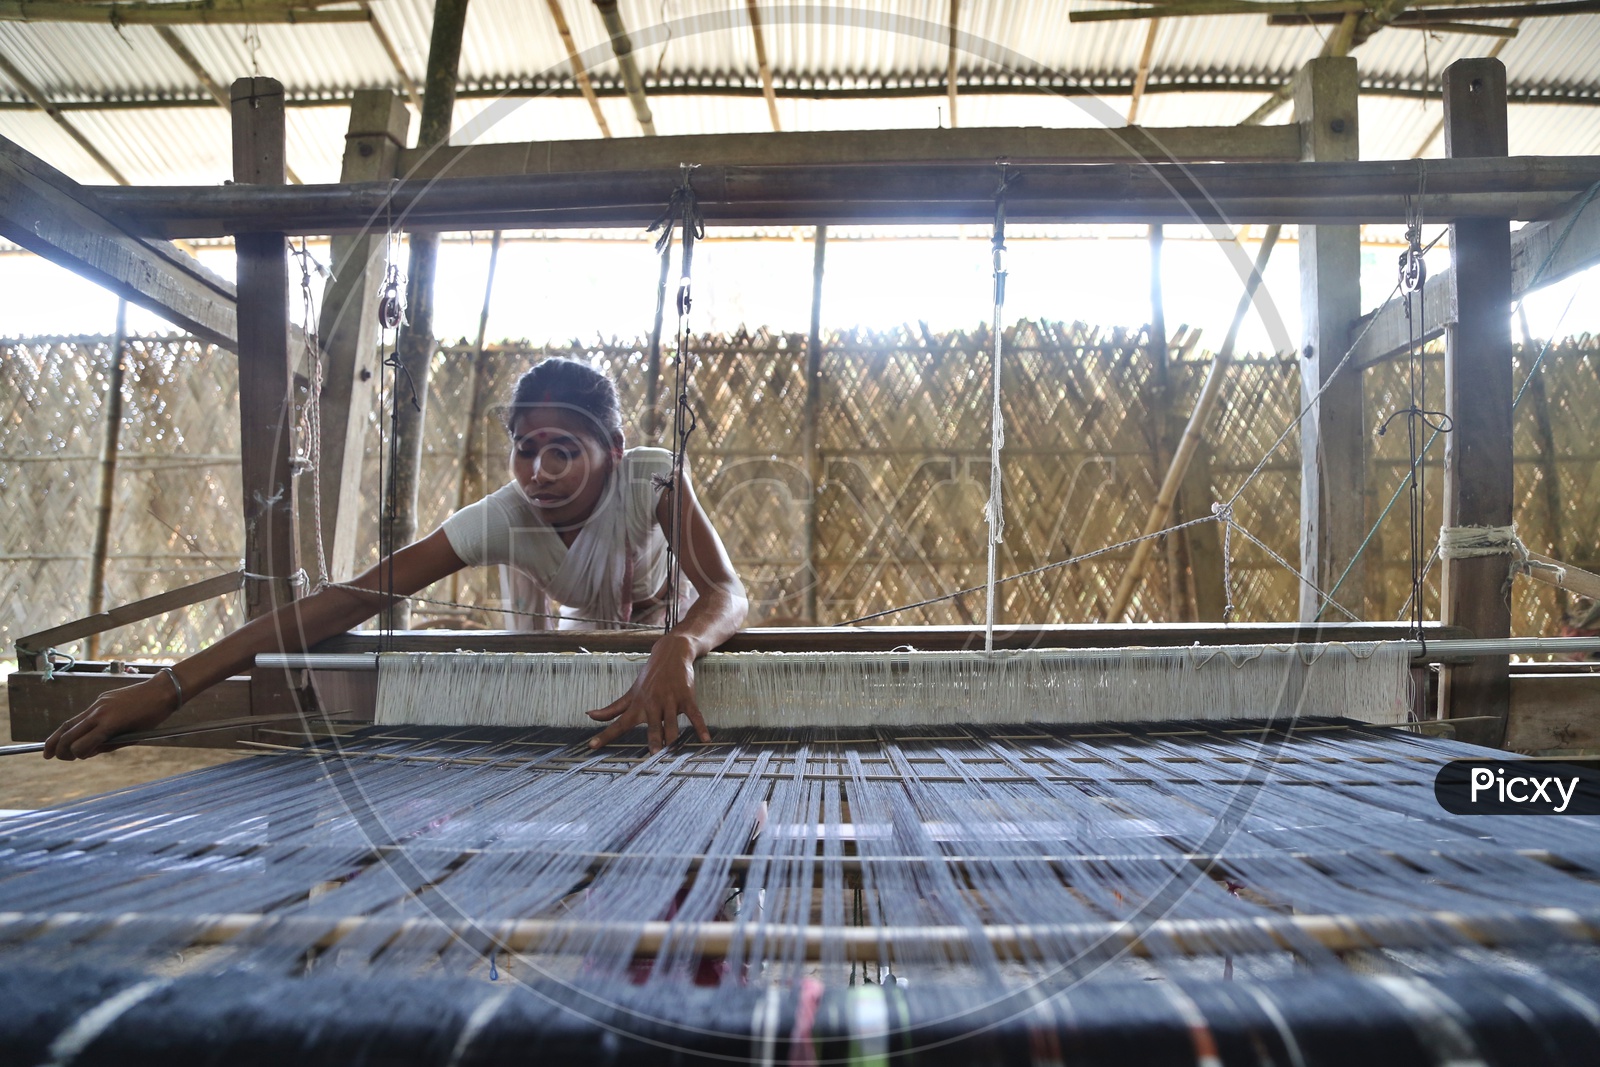 An Indian Woman Weaving The Hand loom  Saree Or Sari  in A Traditional Weaving Machine In Rural Village House